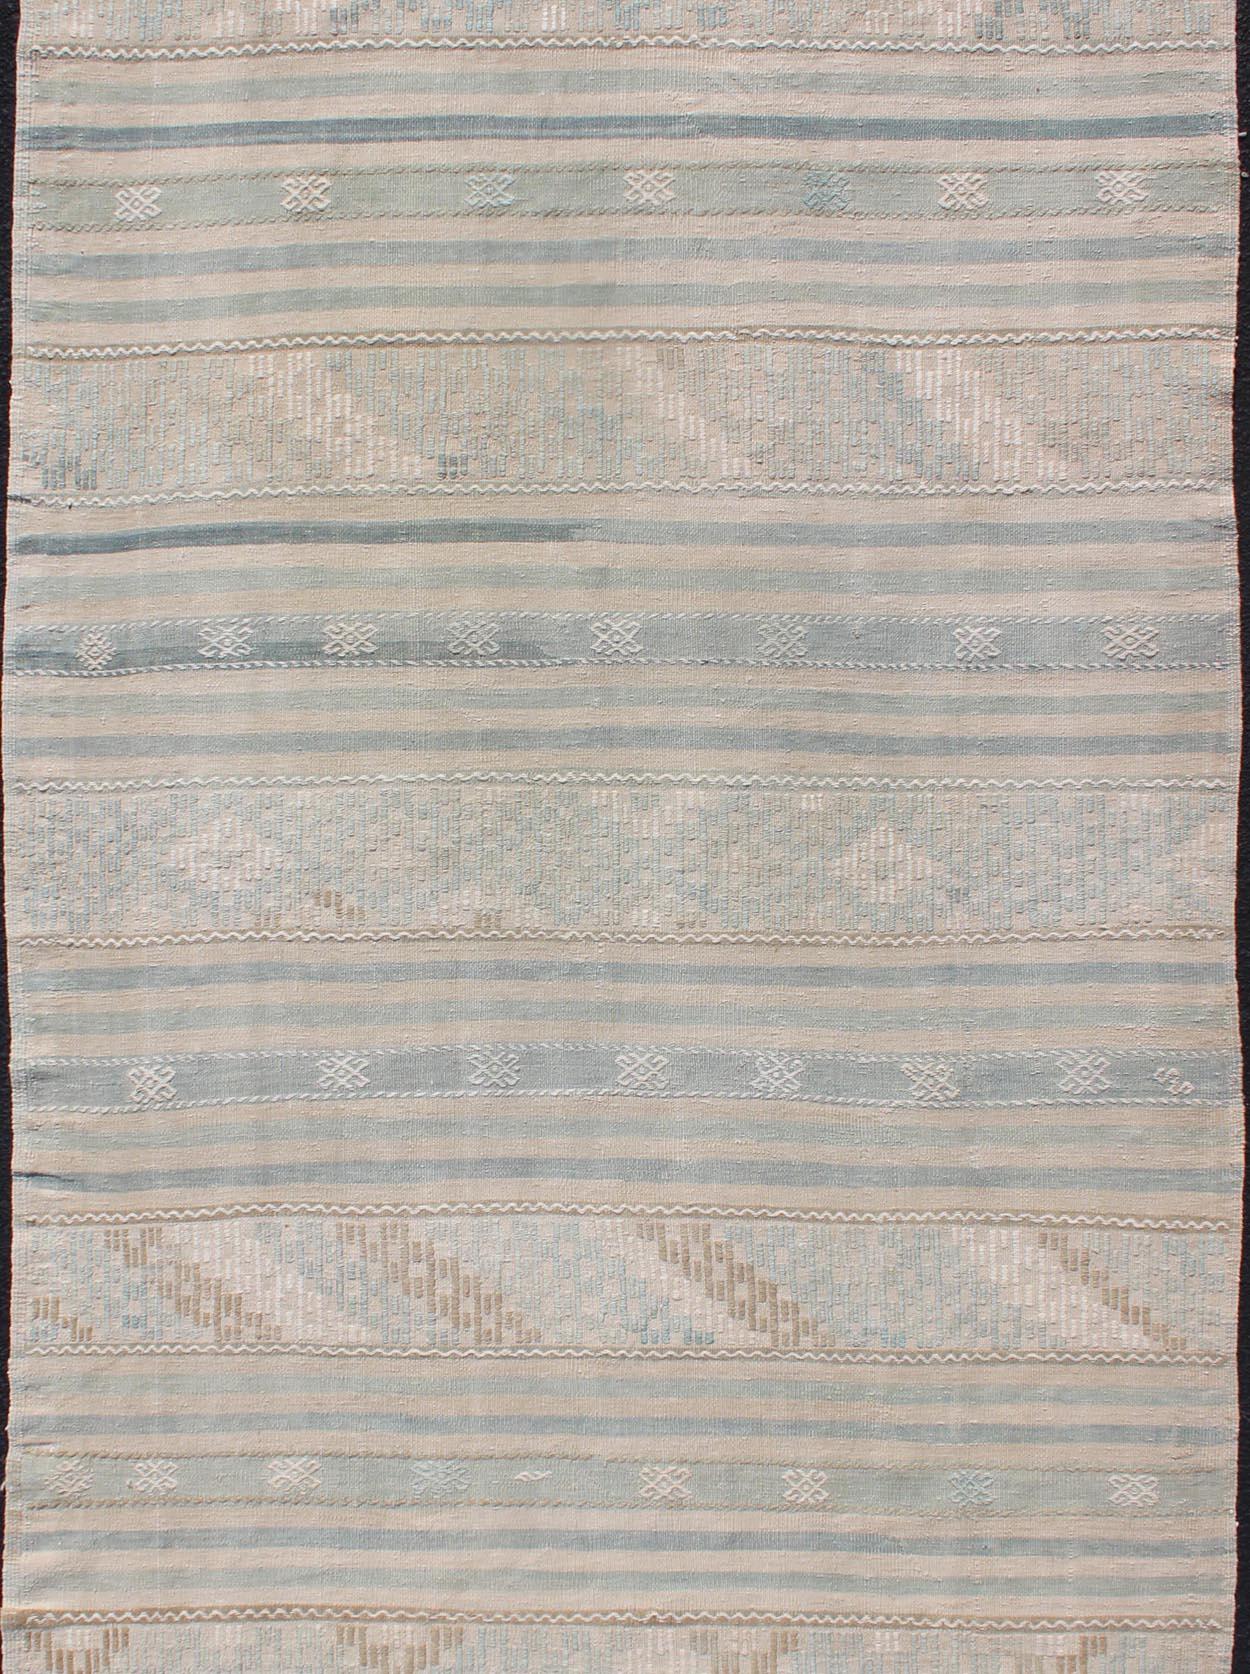 Natural-Toned Turkish Flat-Weave Kilim with Geometric Stripes Tan and Seafoam In Good Condition For Sale In Atlanta, GA